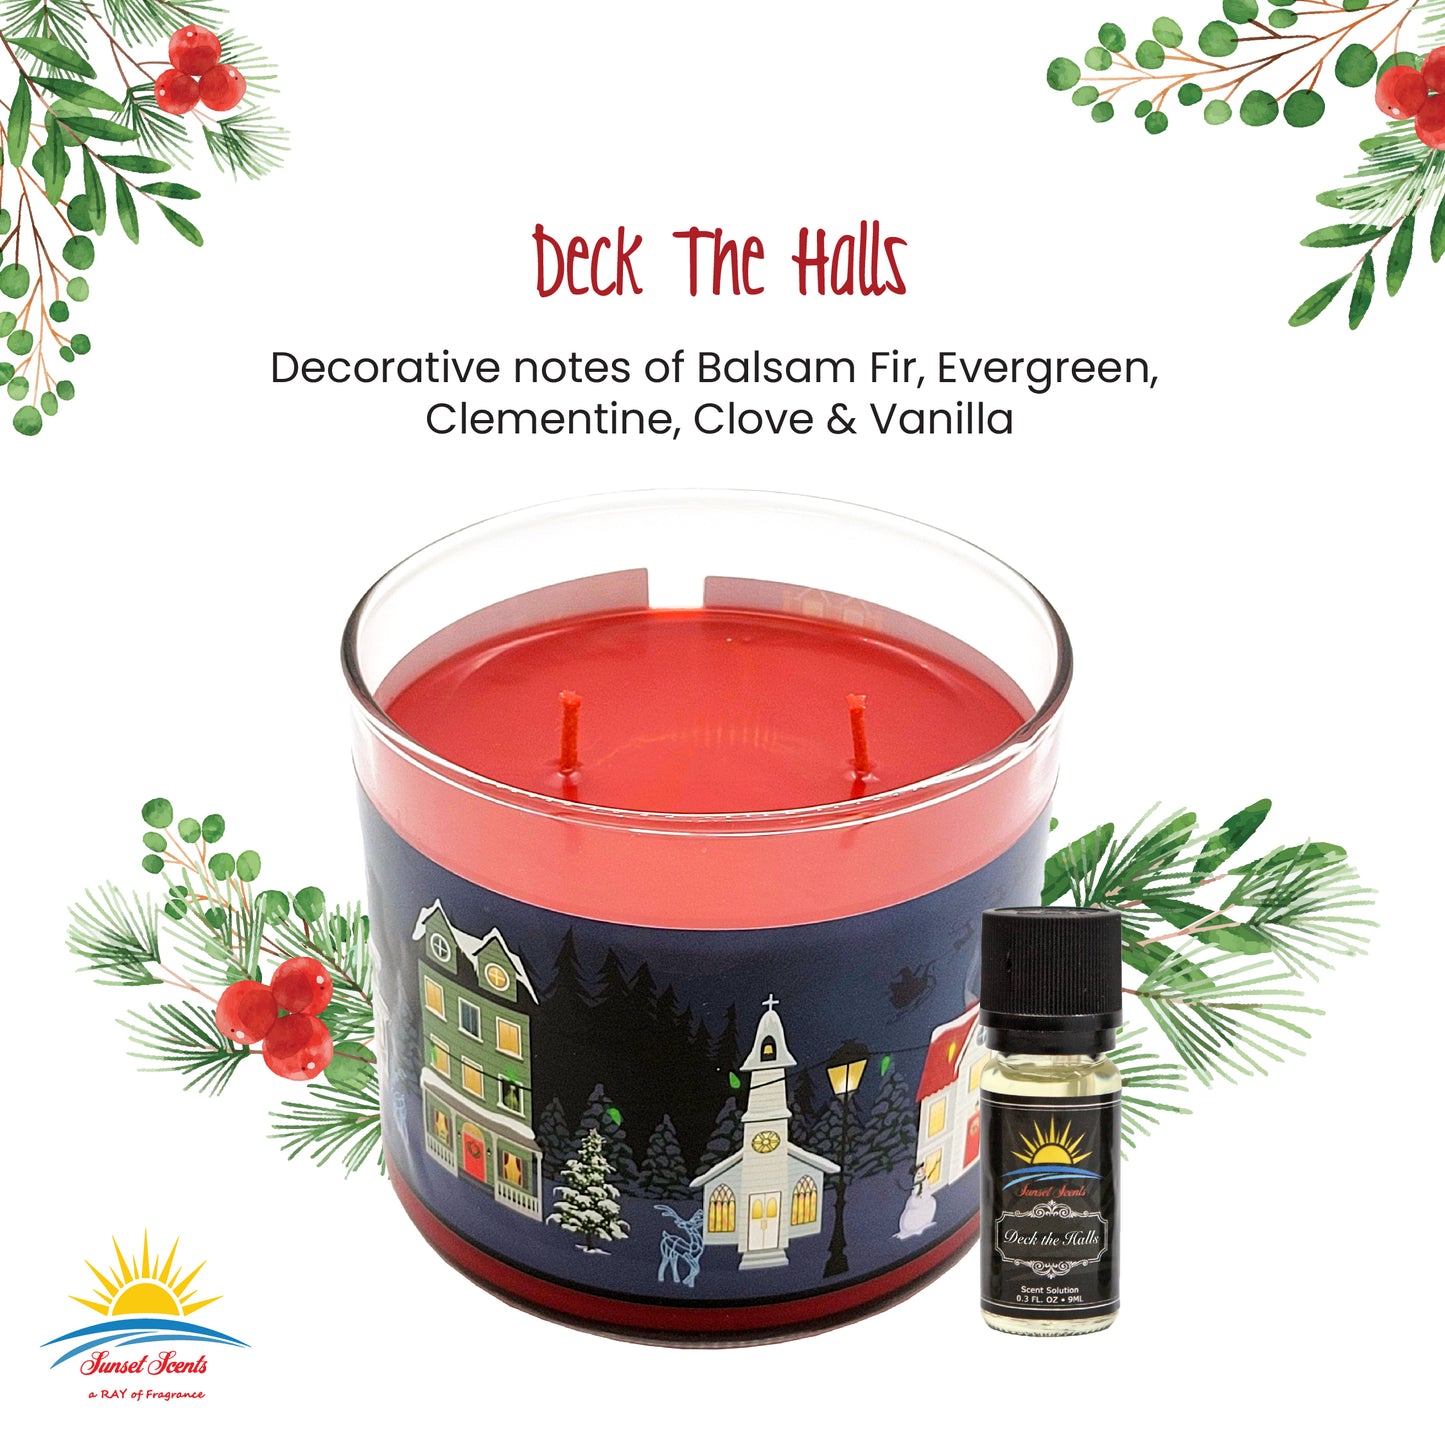 Deck The Halls - Musical Memories Scented Candle 14oz